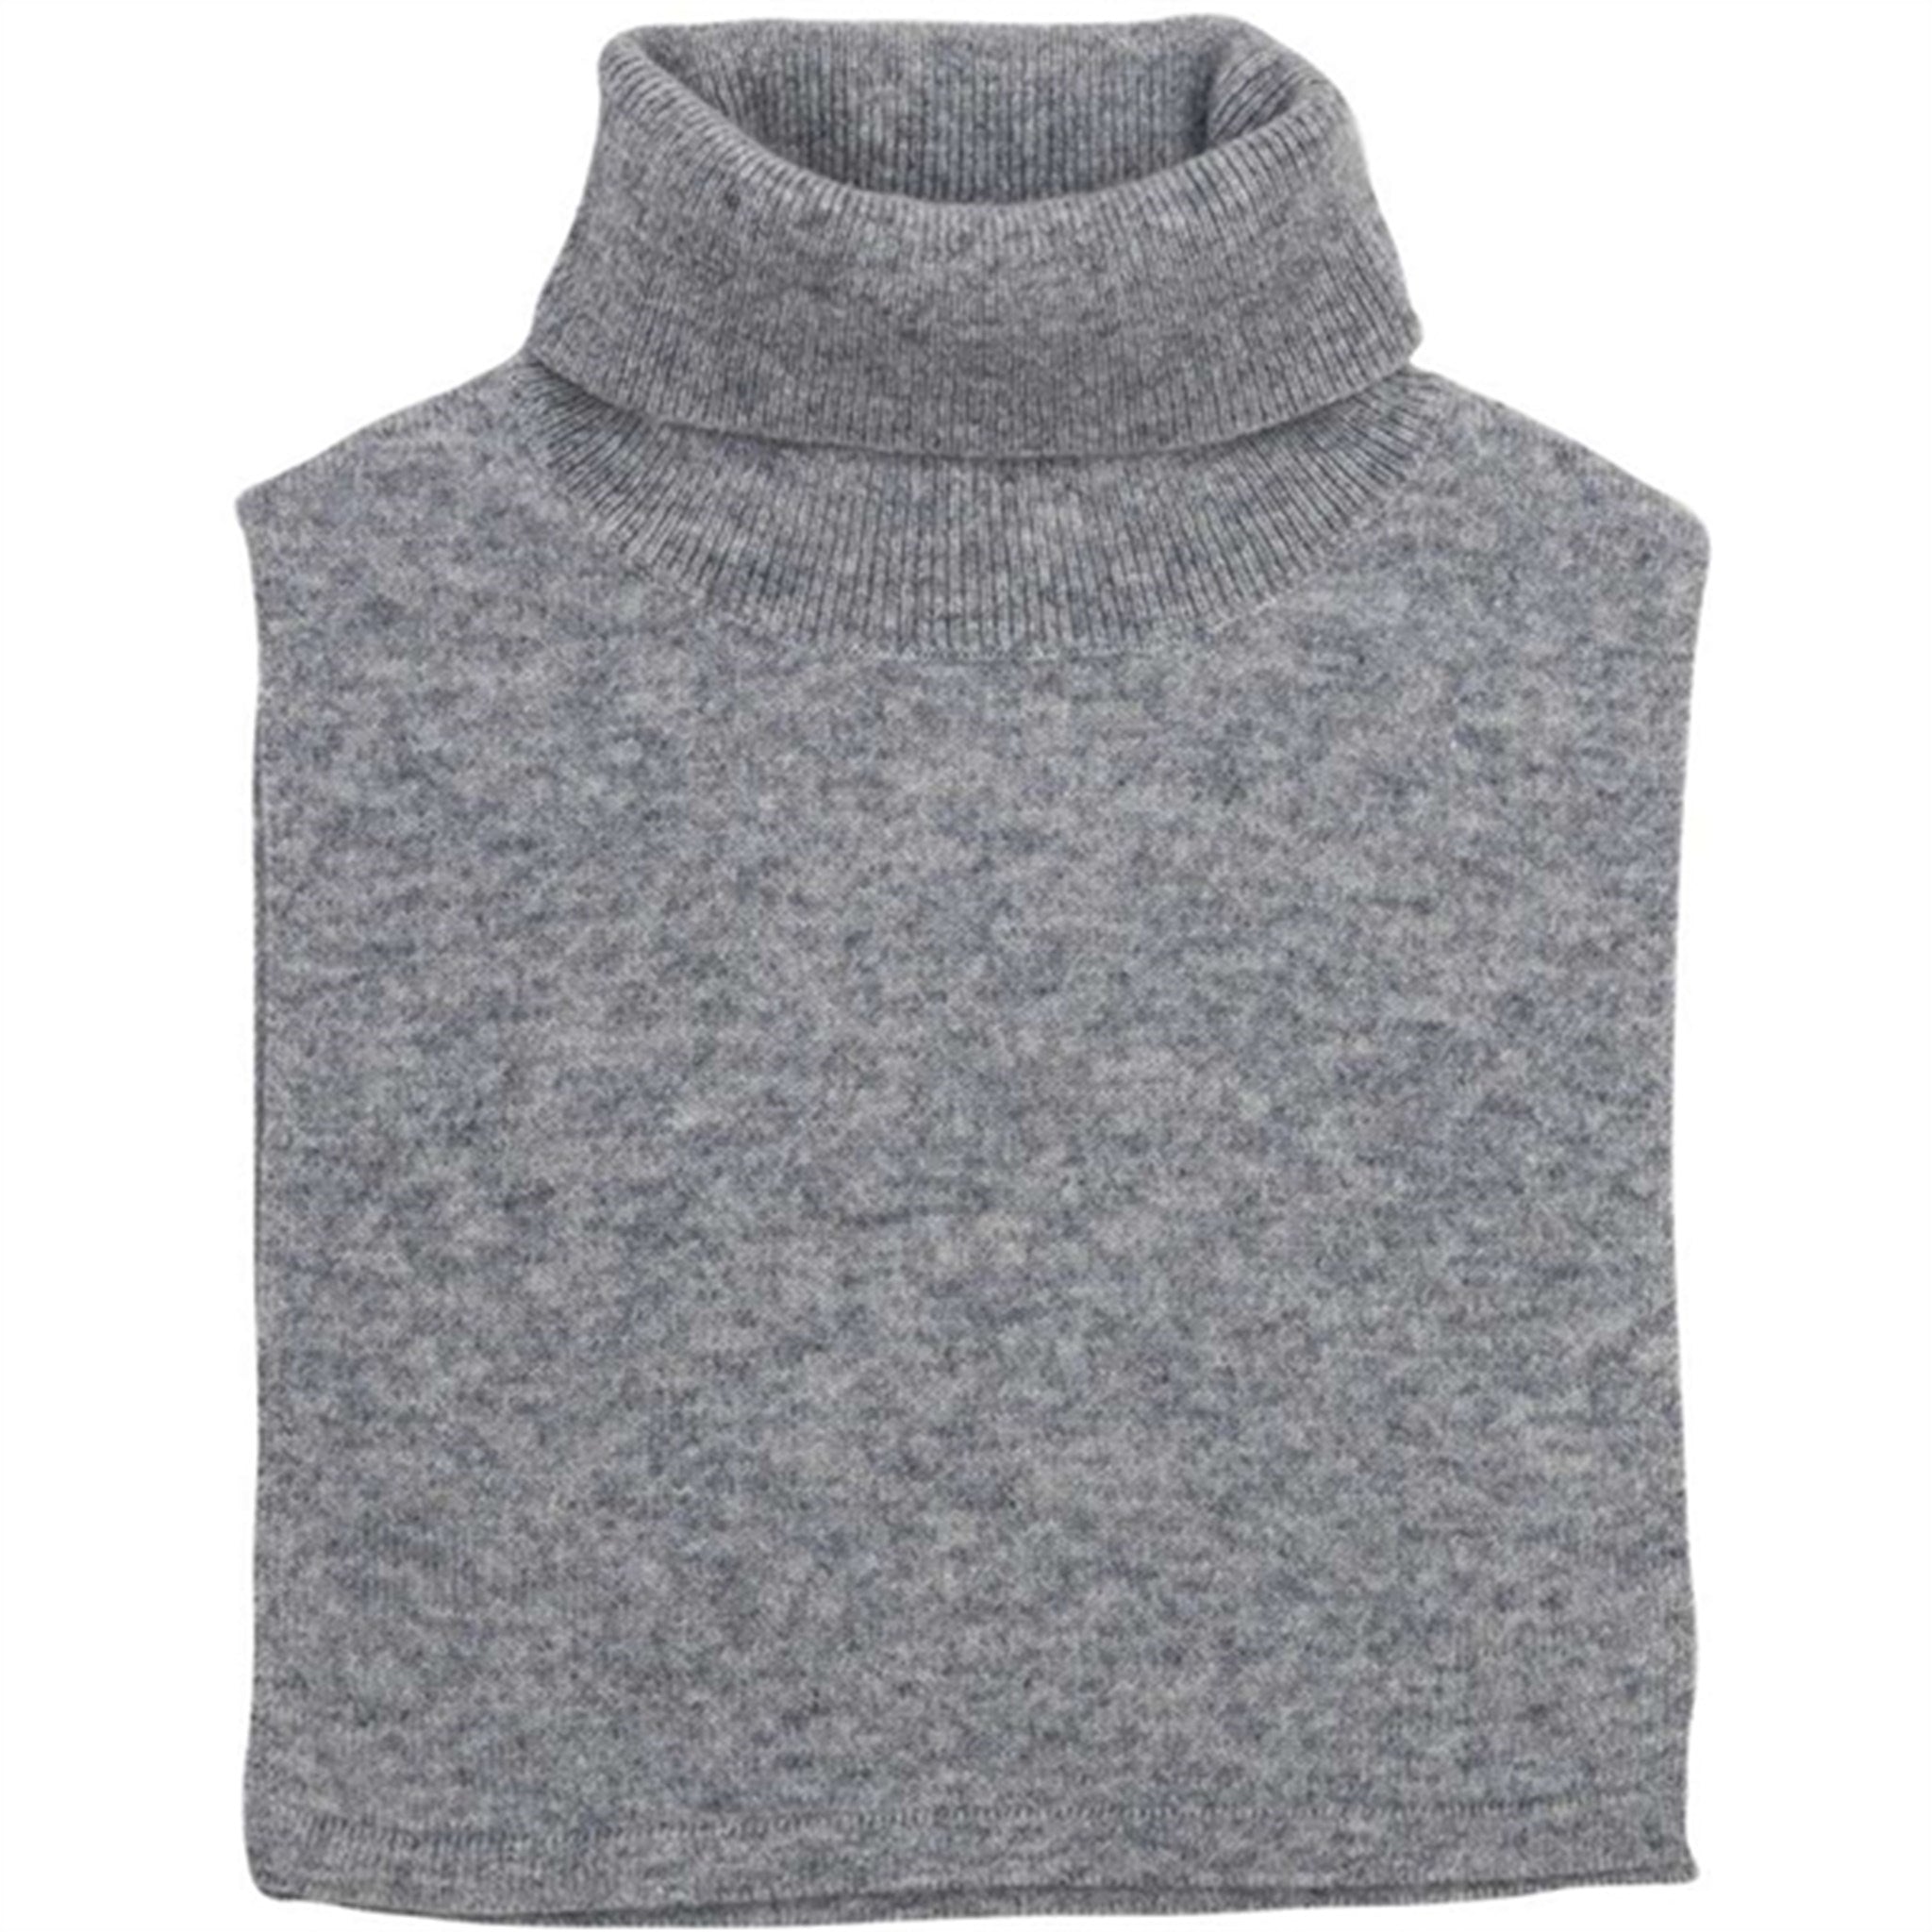 HOLMM Oxford Lou Cashmere Knit Neck Cover